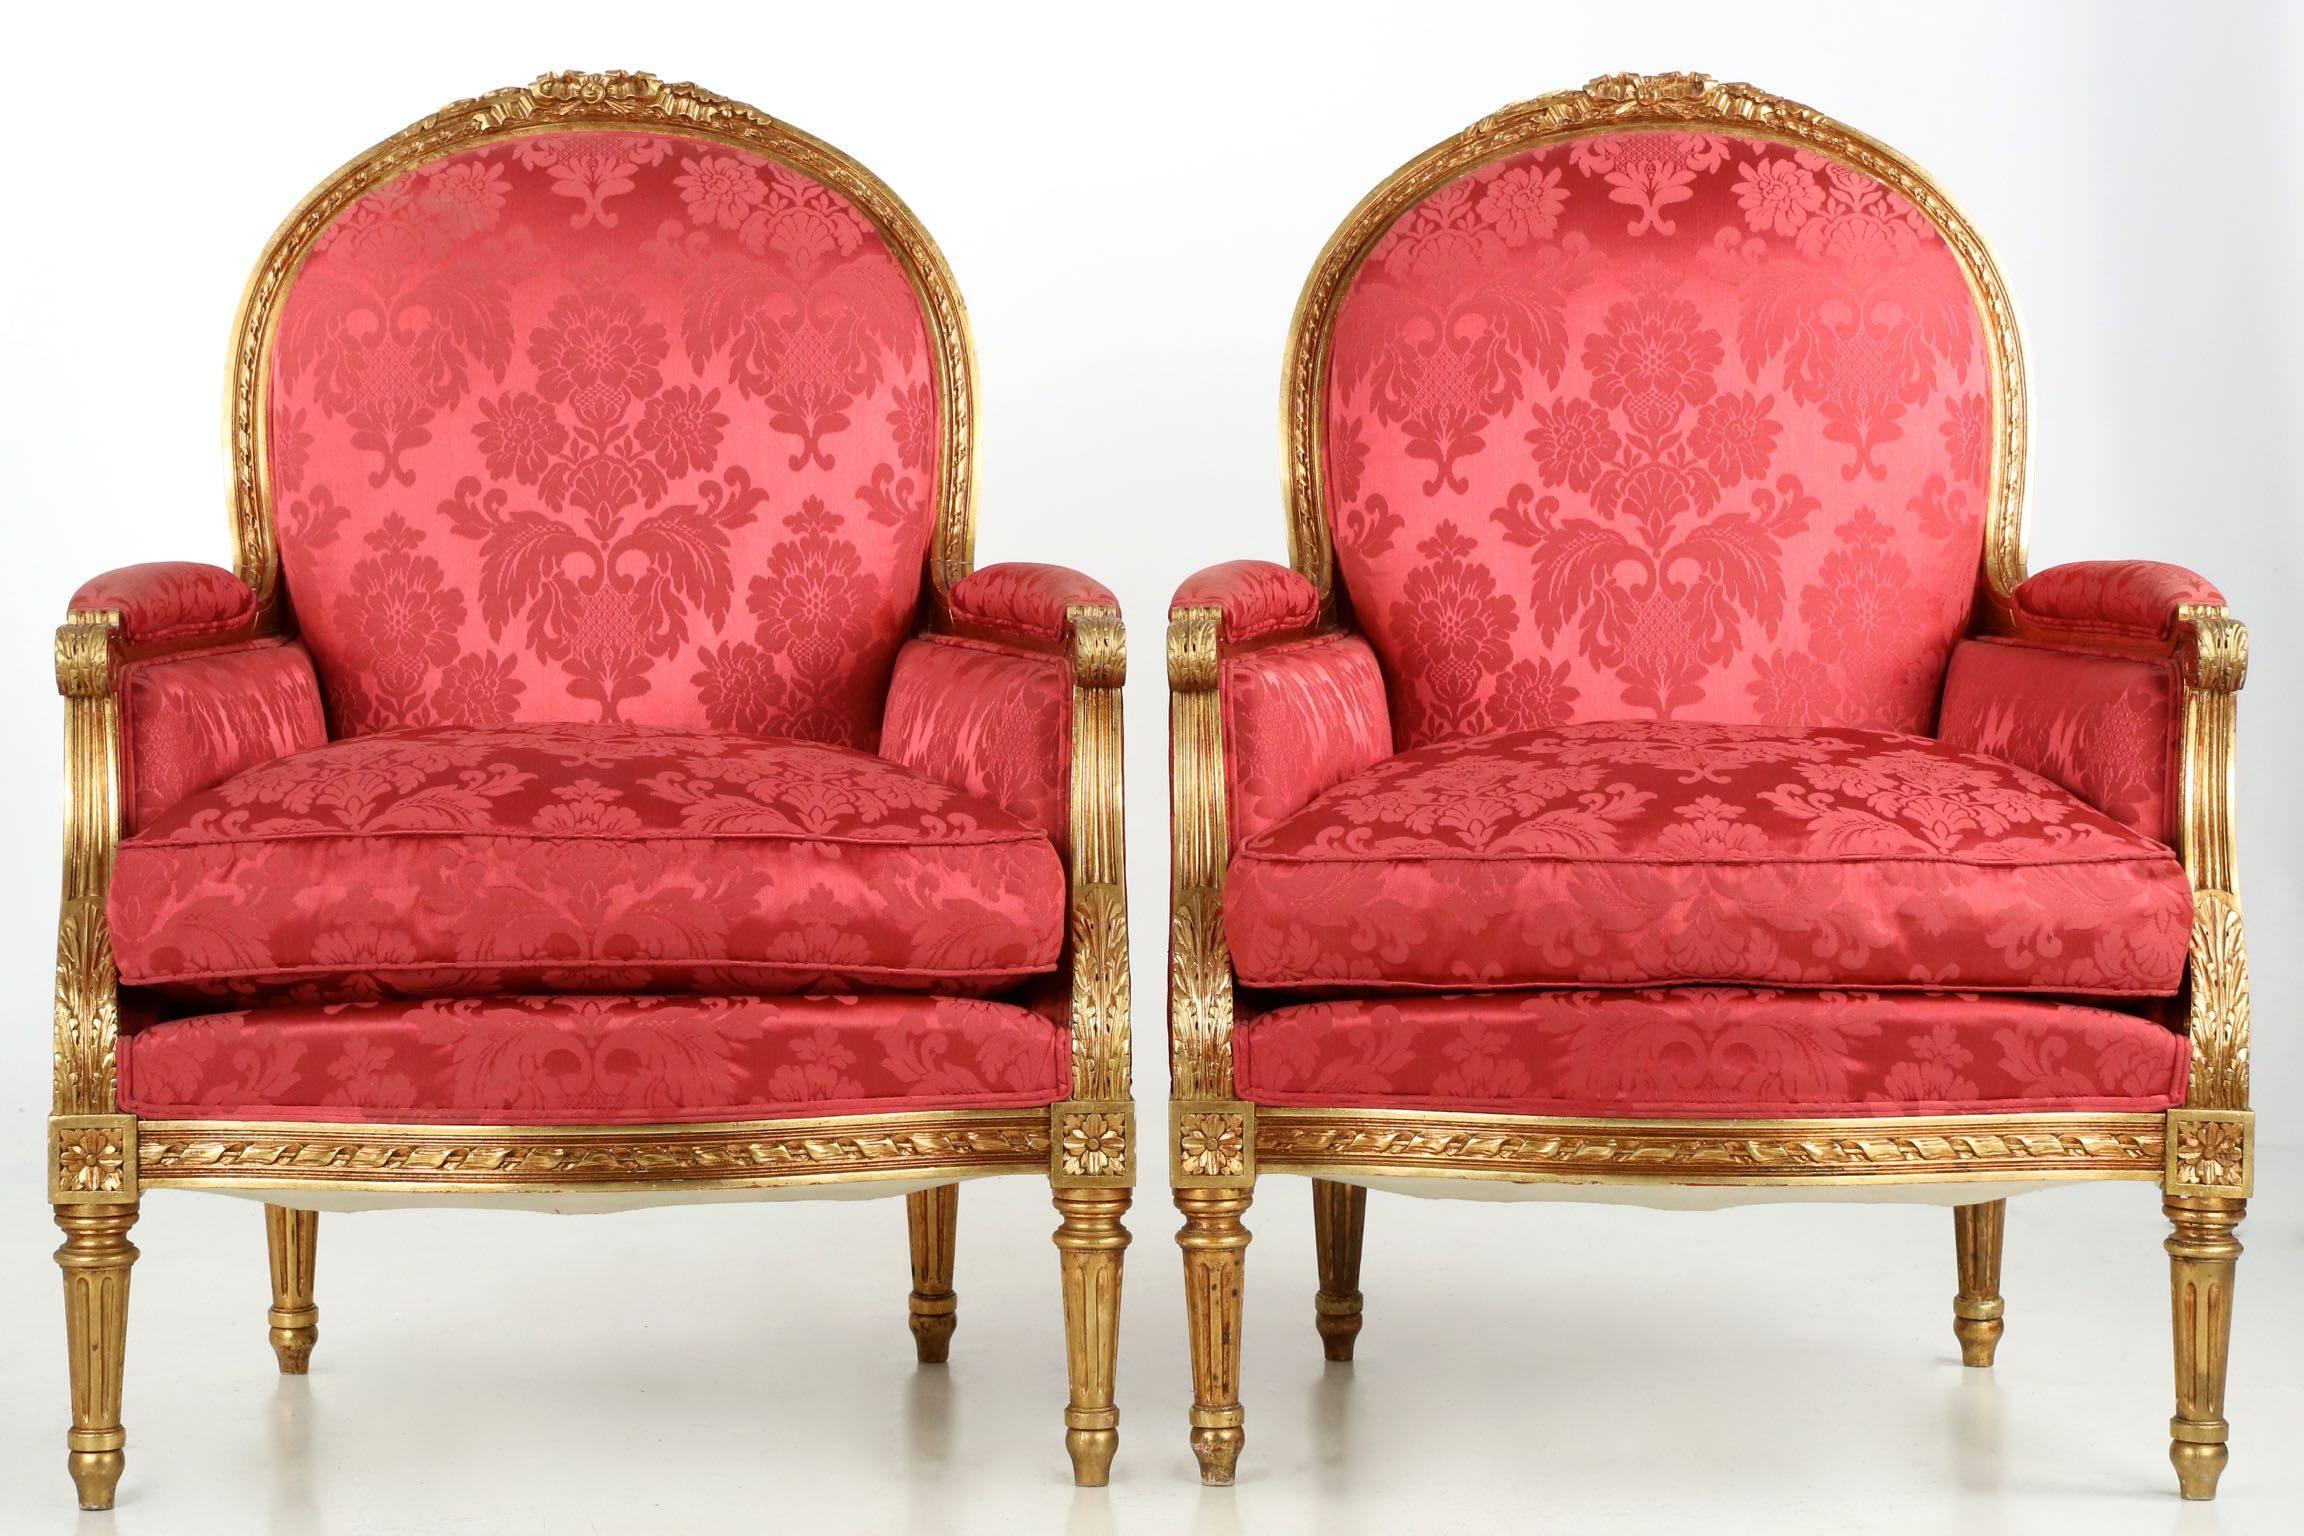 This refined pair of Louis XVI style bergère is crafted with careful attention to detail. An exacting reproduction of the original forms, the chairs are crafted of solid beechwood that has been expertly carved with an intricate display of twisted